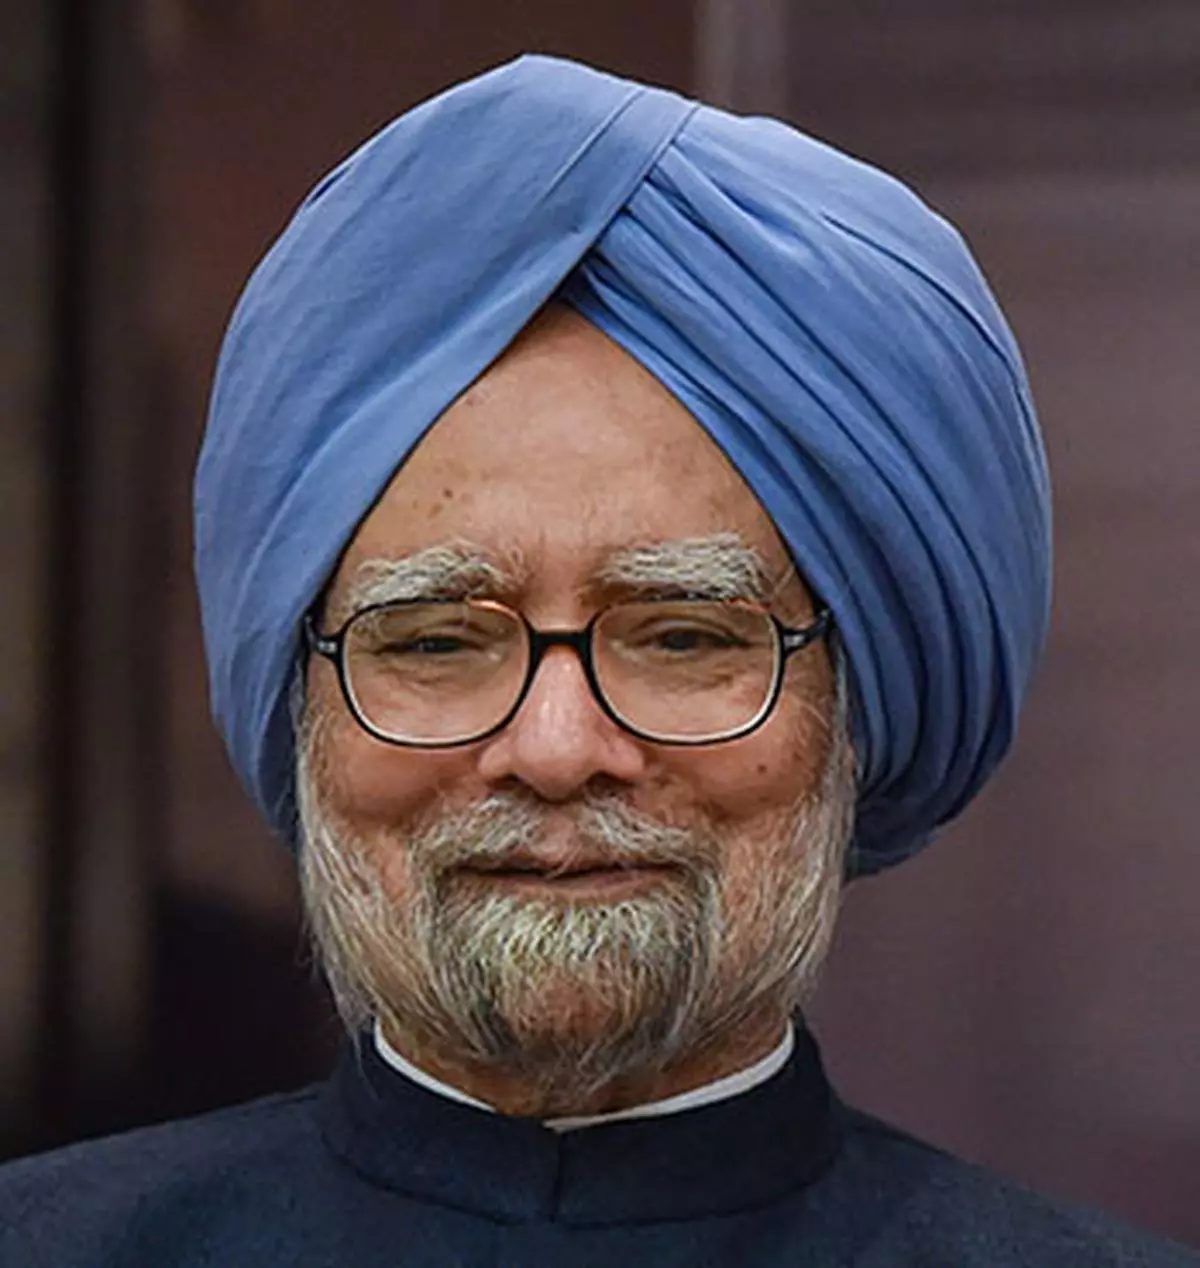 Manmohan Singh, architect of India's economic reforms, ends Rajya Sabha innings after a brilliant career